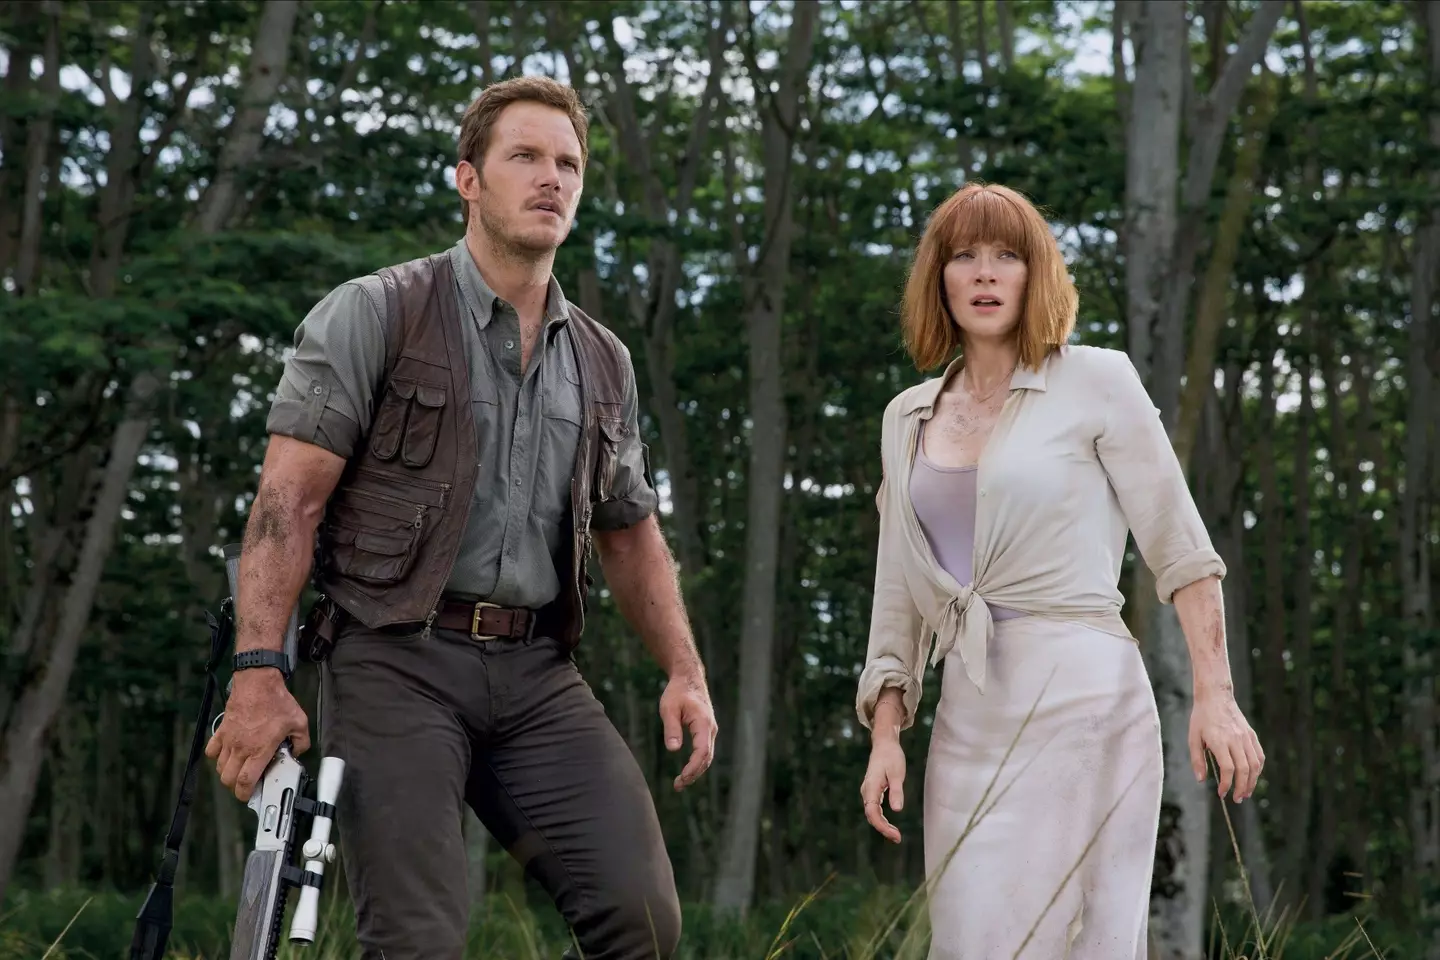 Bryce Dallas Howard previously said she was paid less for her role than co-star Chris Pratt.